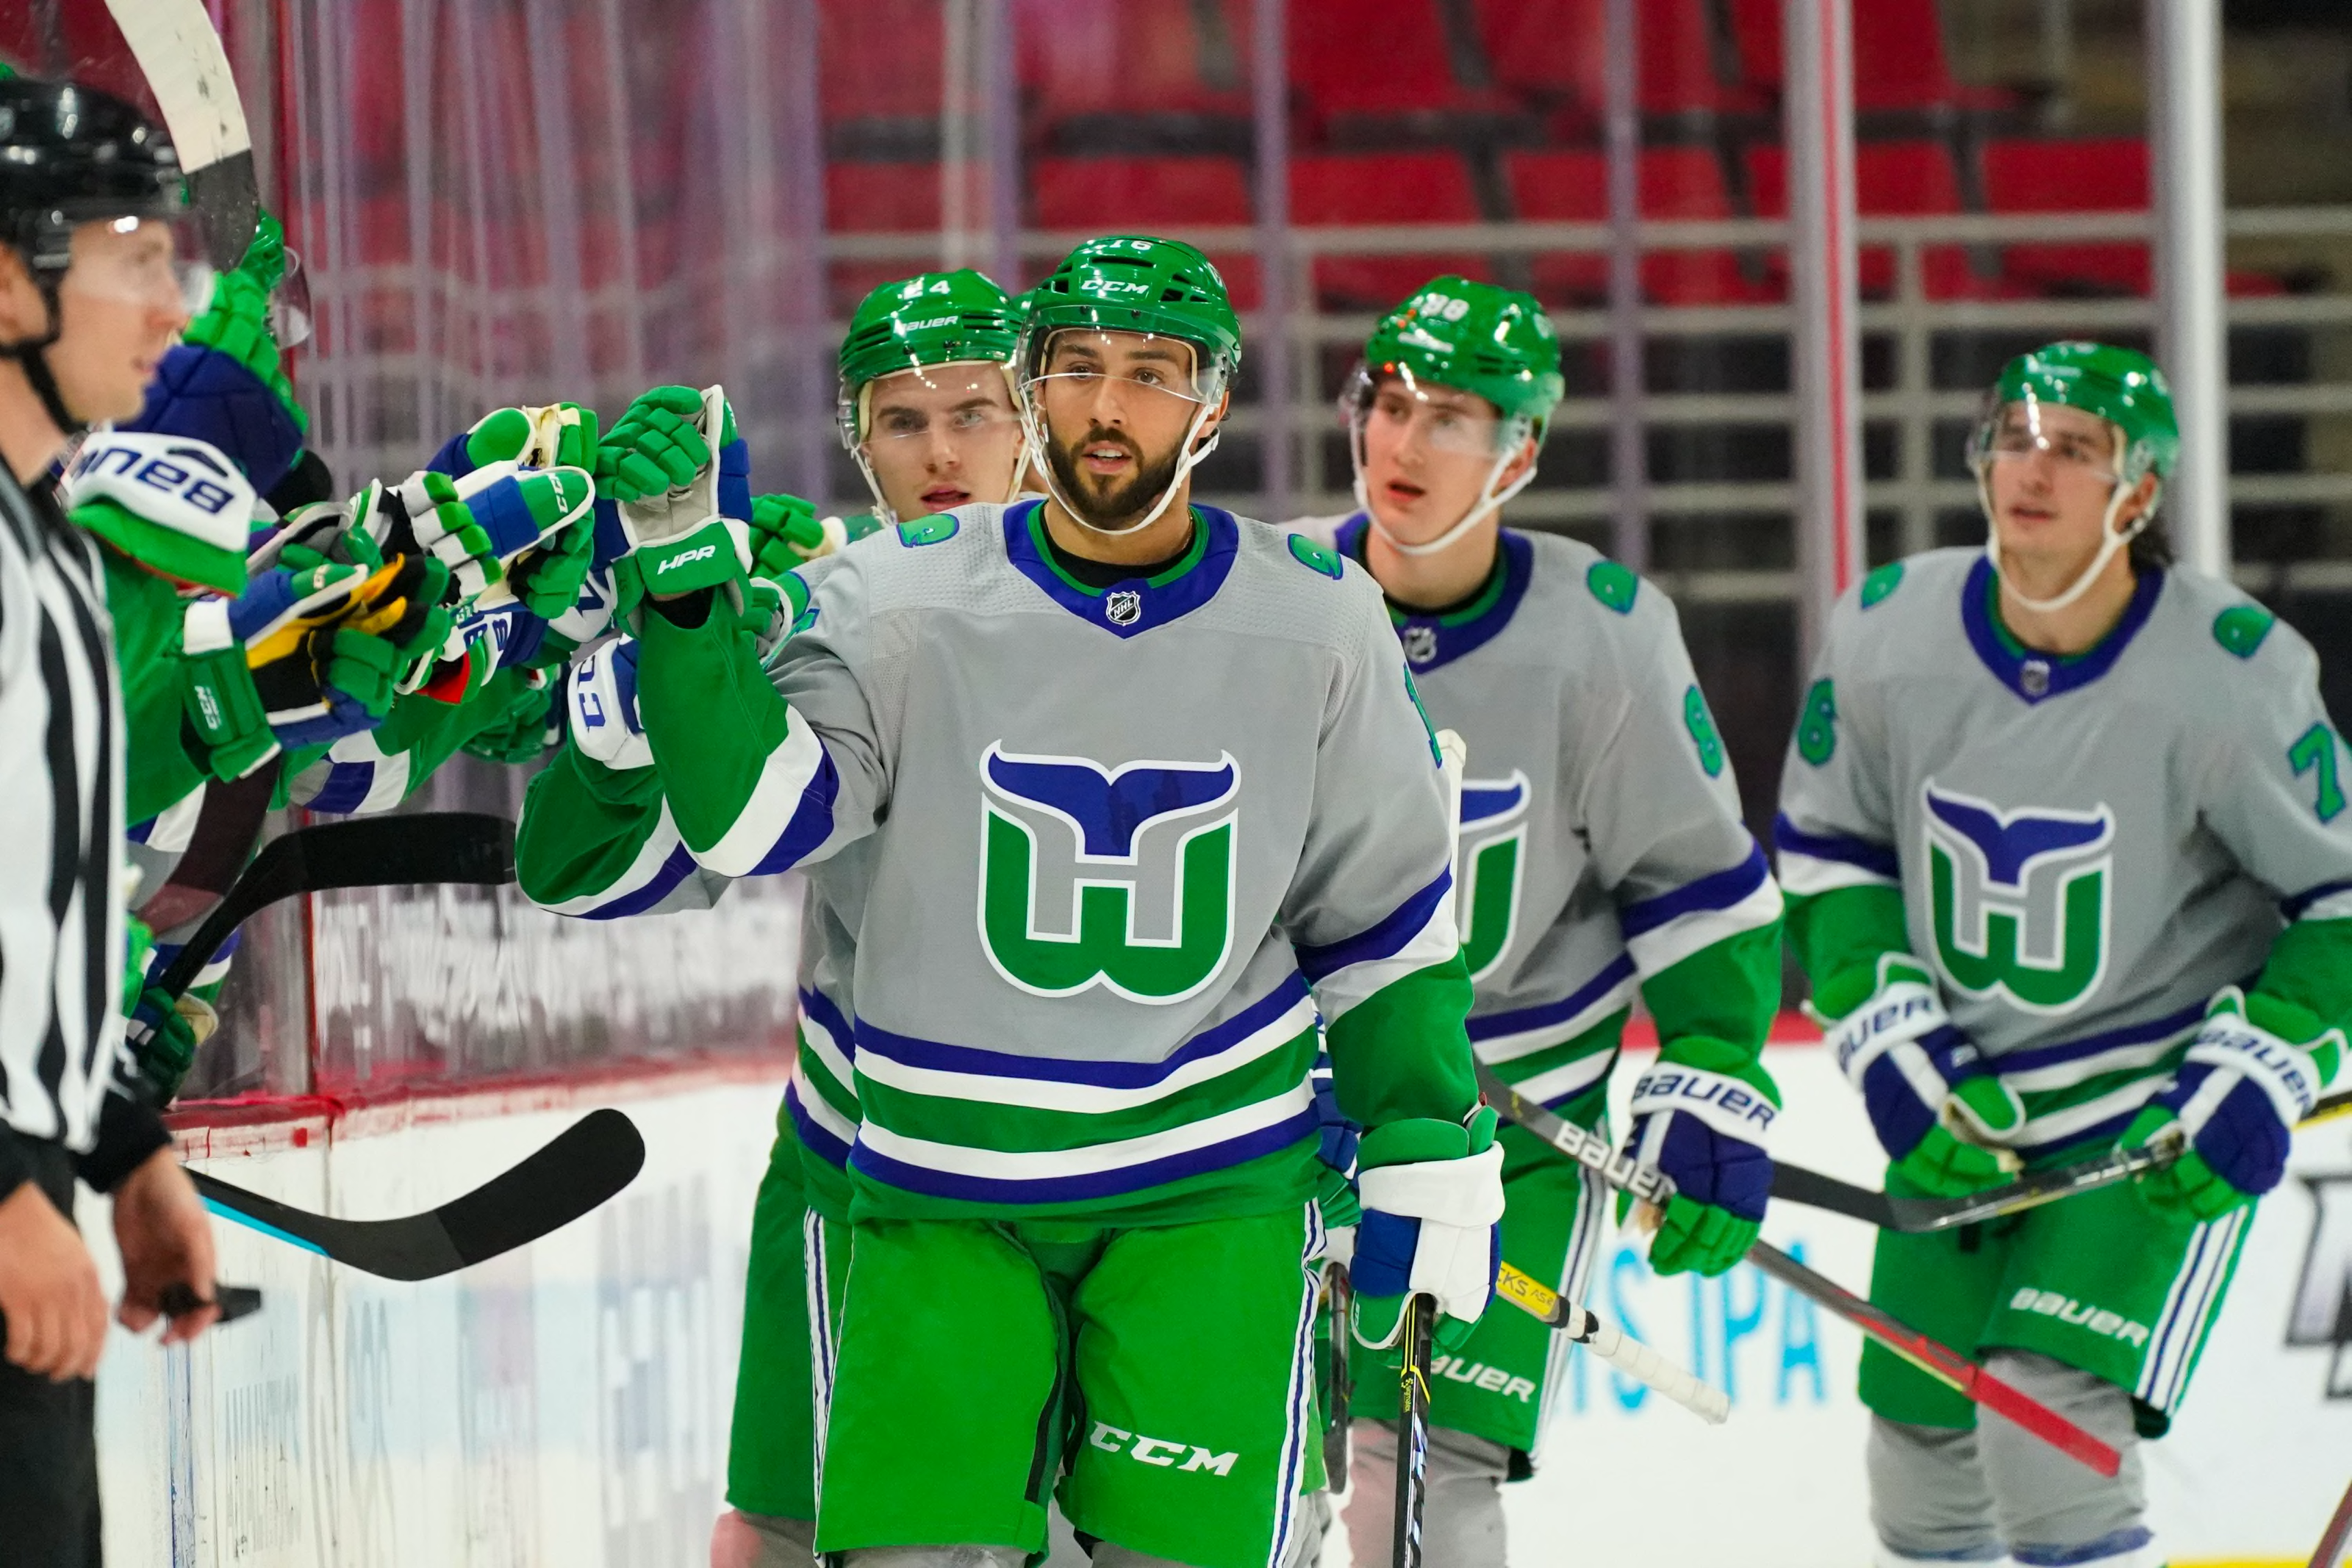 Watch the Hurricanes take to the ice in Hartford Whalers jerseys